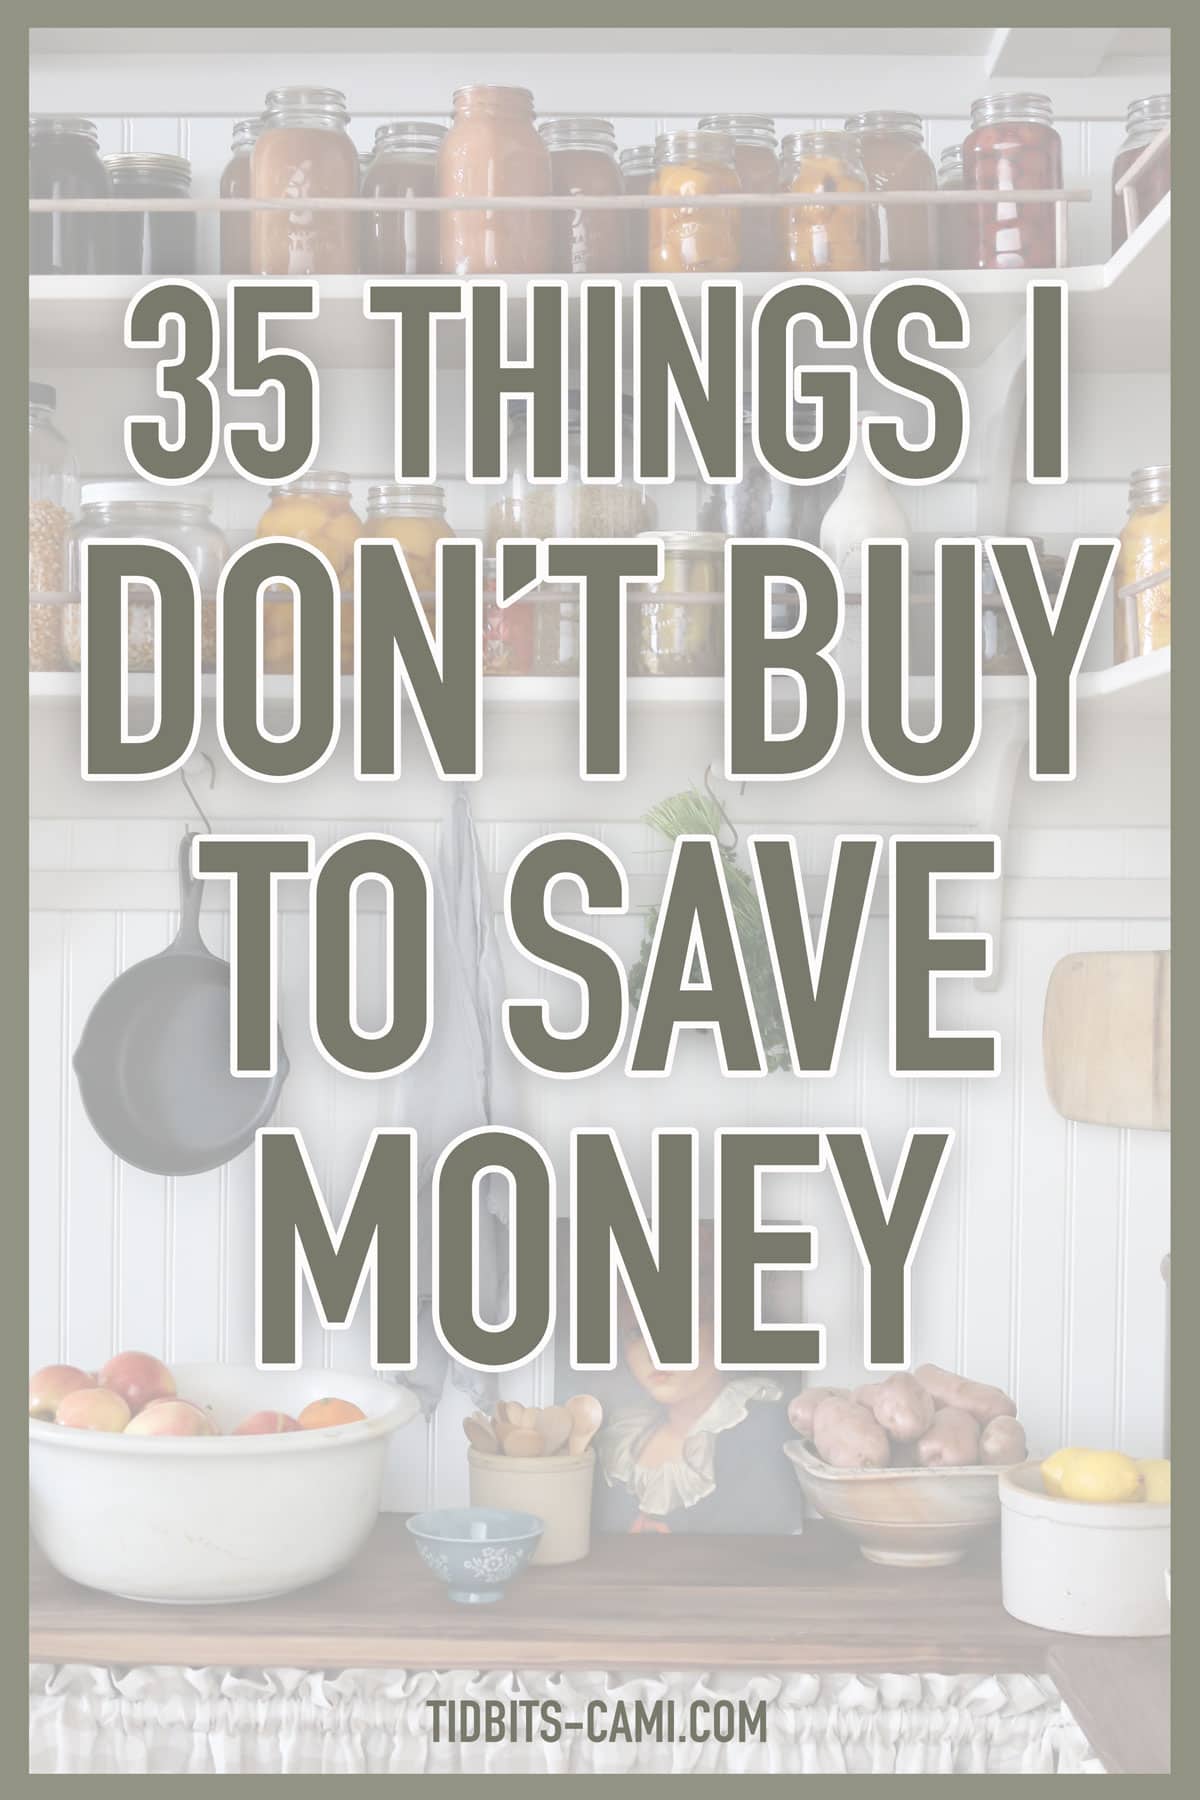 Pantry image behind text "35 things I don't buy to save money"